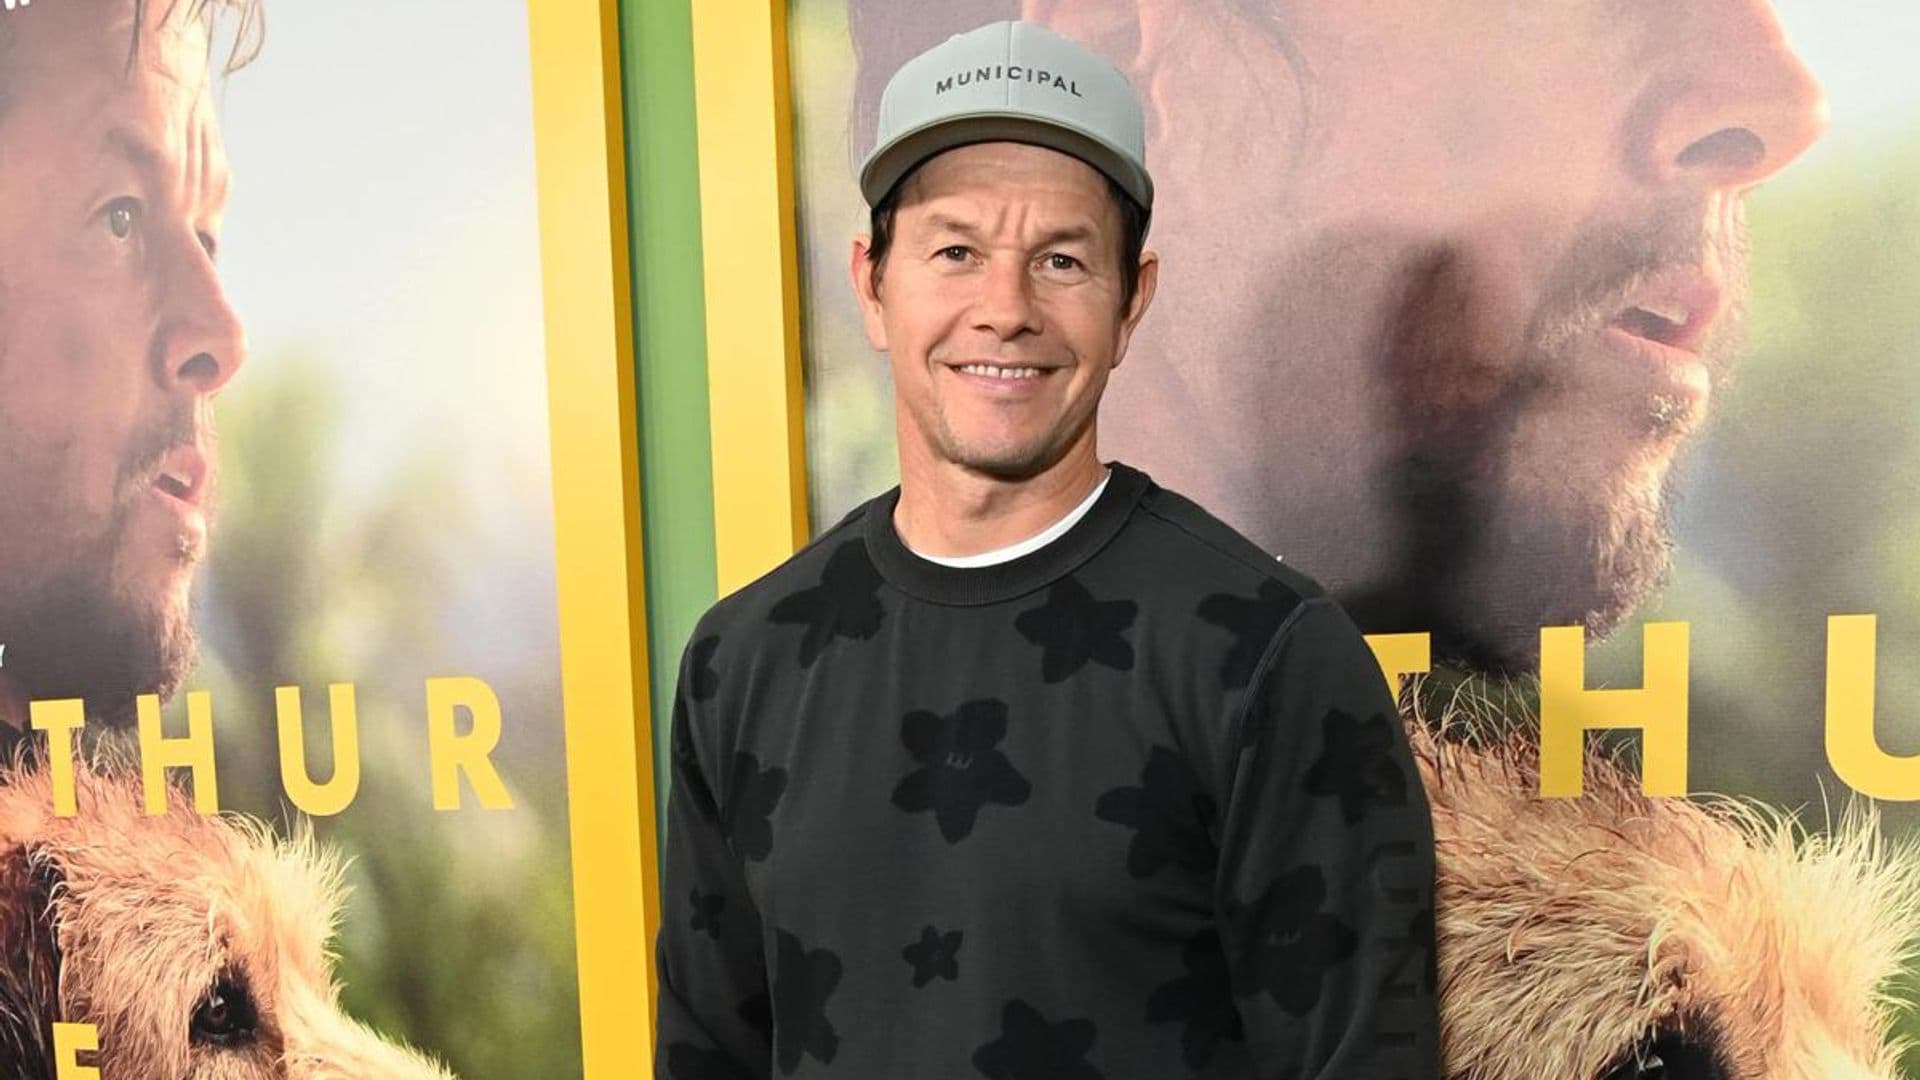 Mark Wahlberg is the Dominican Republic’s new son: Everything about his cultural immersion